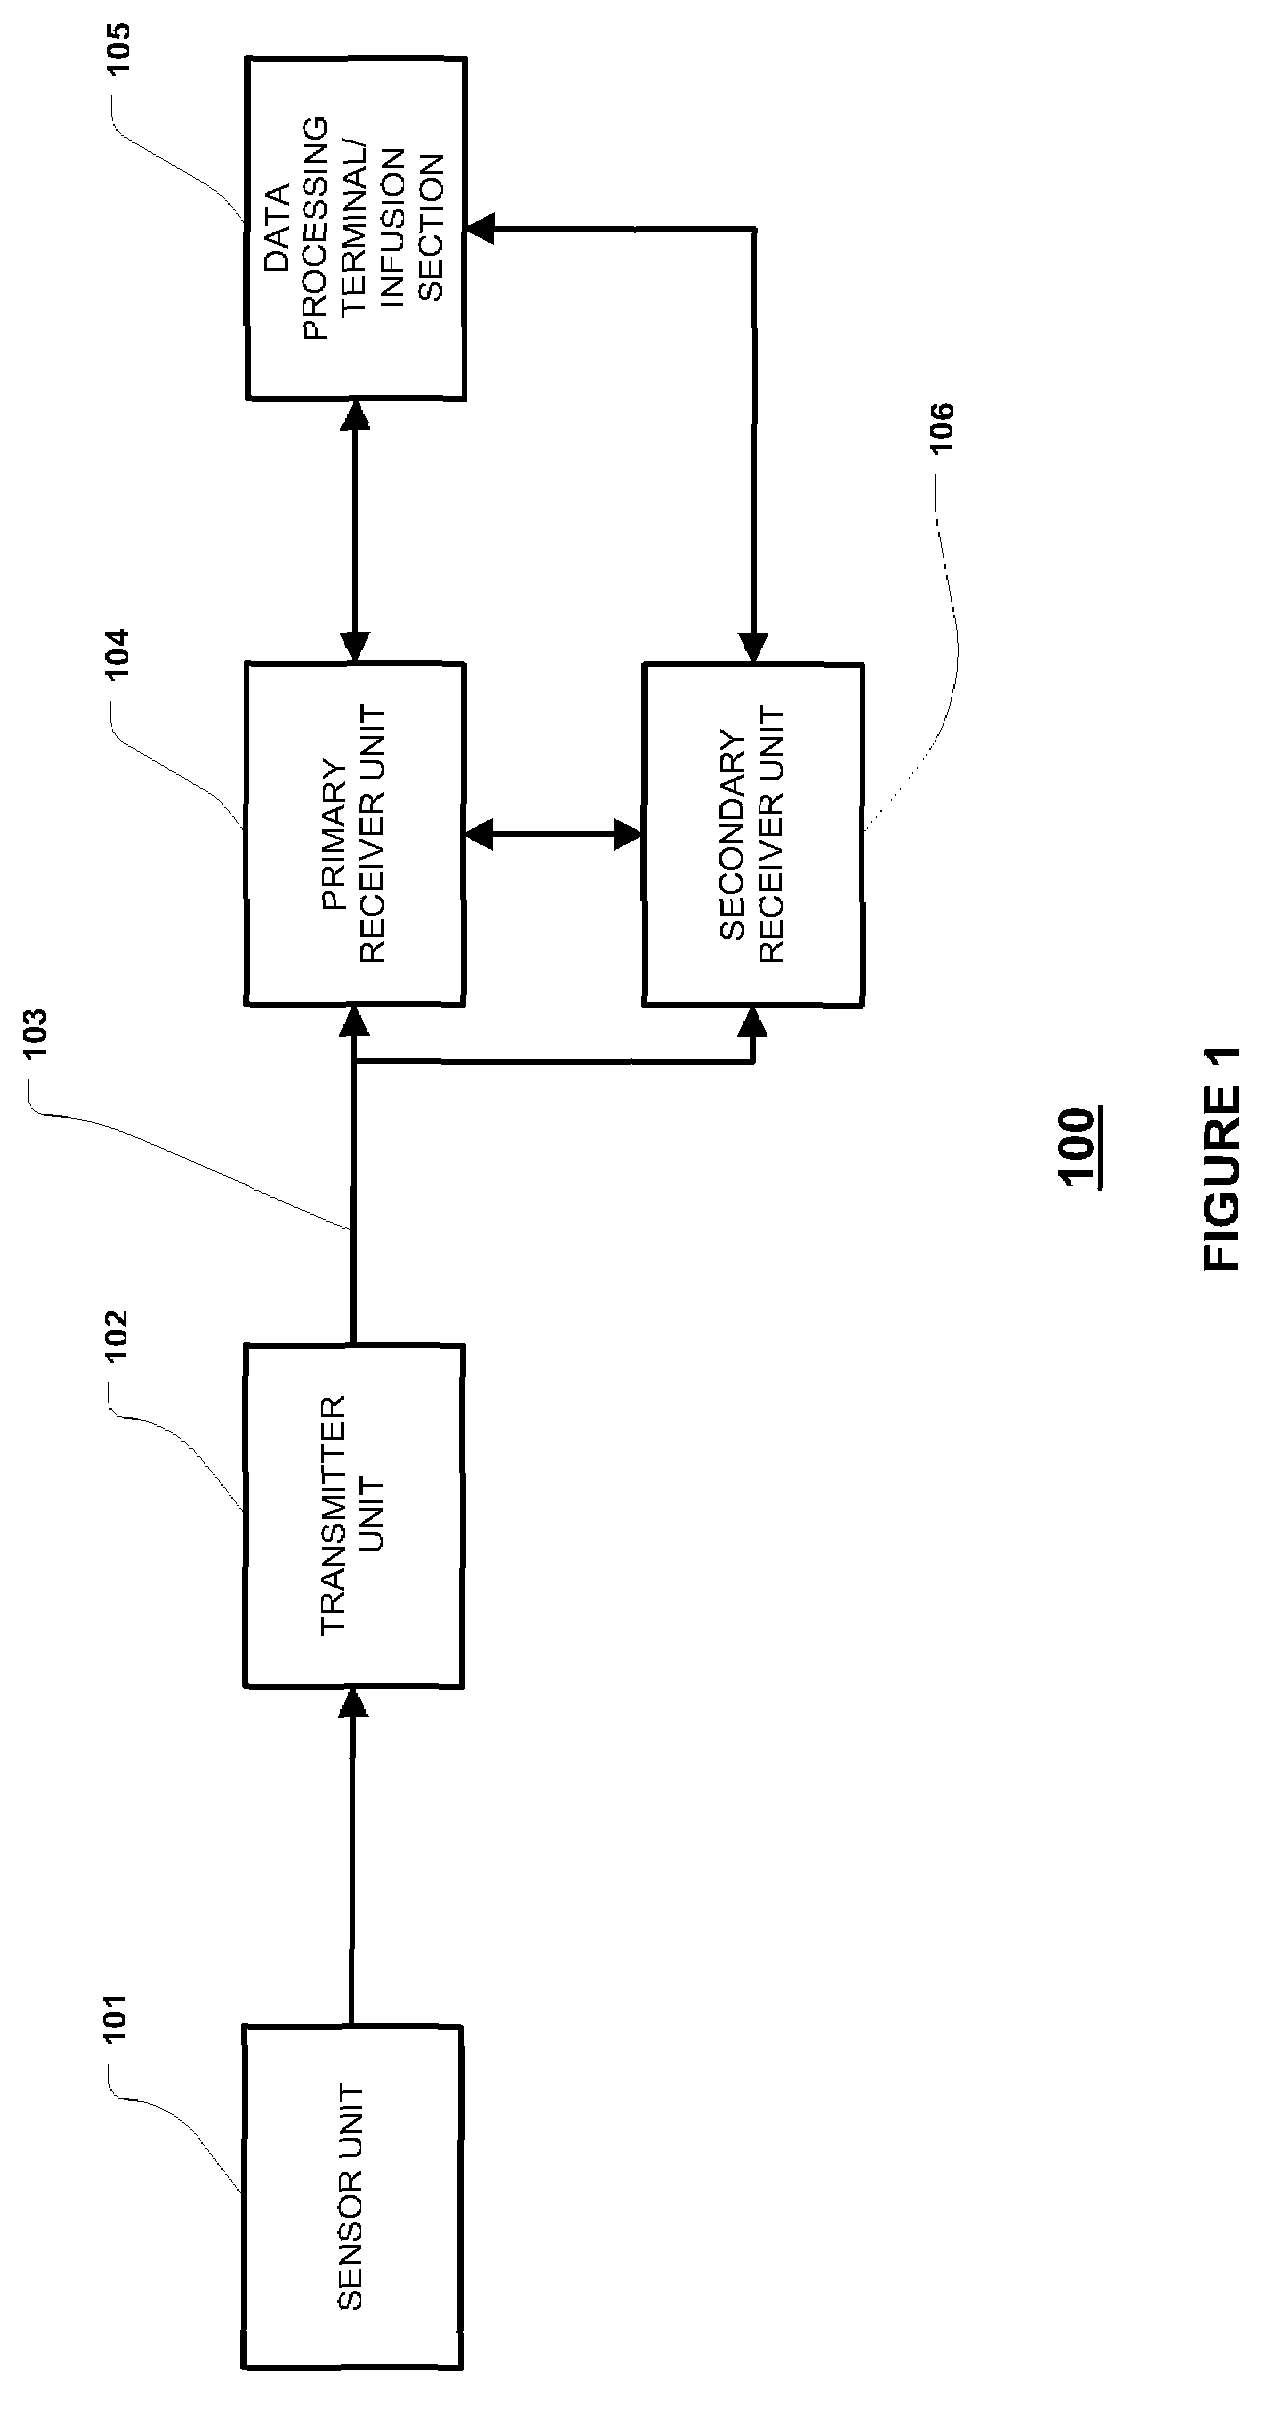 Method and system for dynamically updating calibration parameters for an analyte sensor